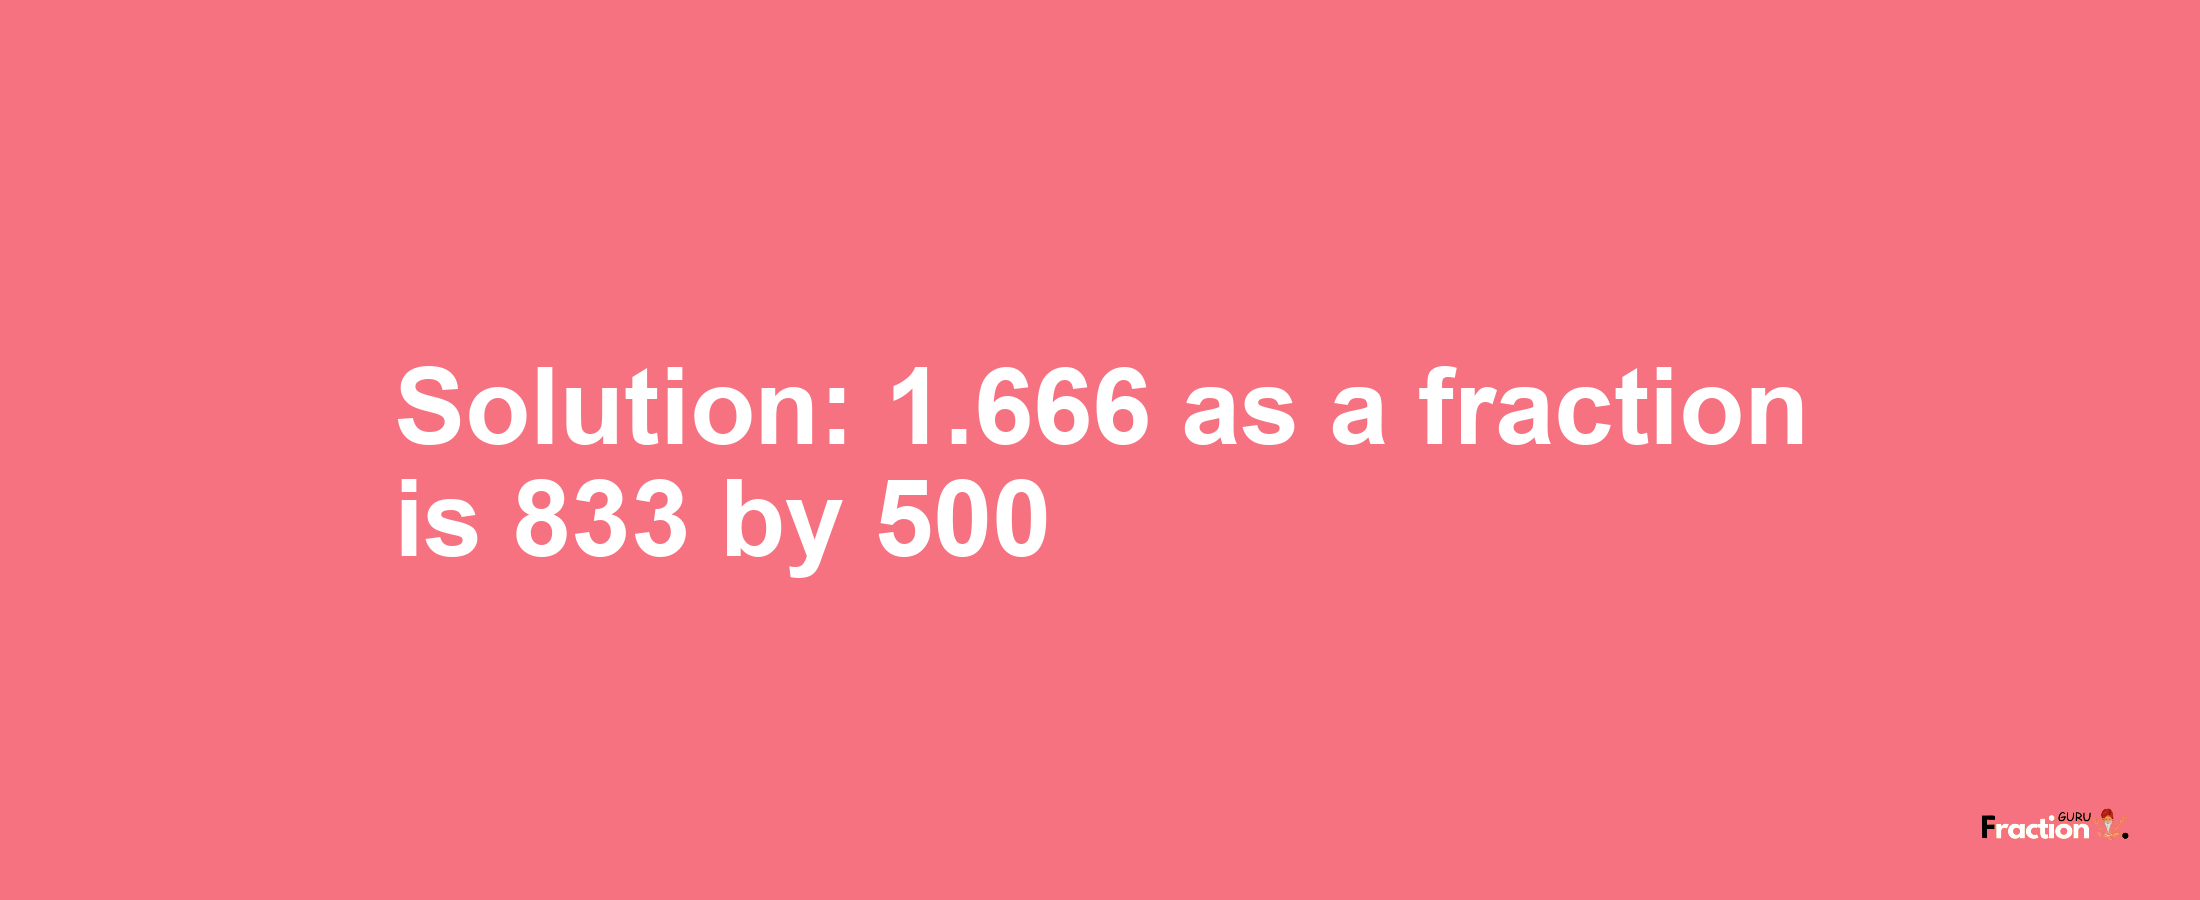 Solution:1.666 as a fraction is 833/500